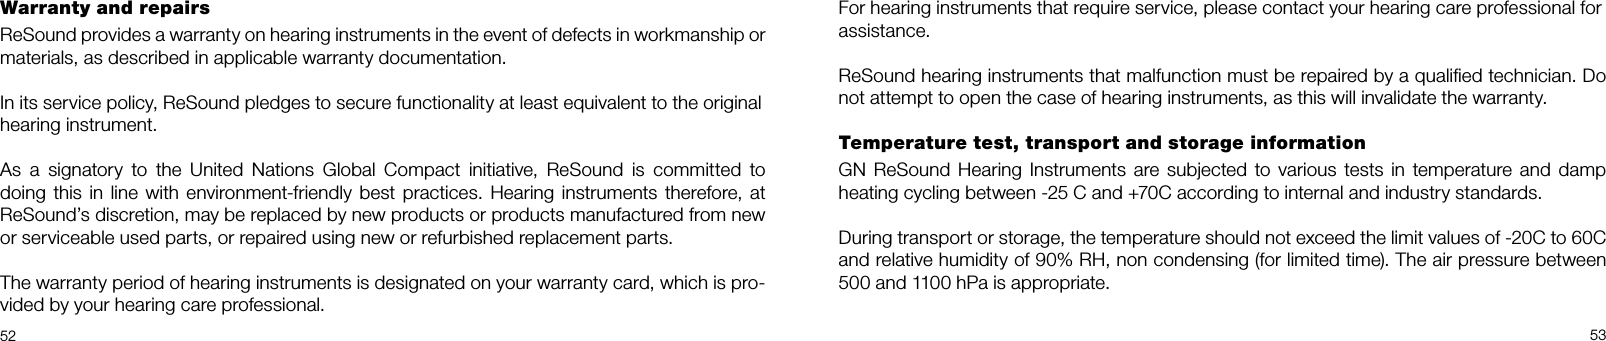 5253For hearing instruments that require service, please contact your hearing care professional forassistance.ReSound hearing instruments that malfunction must be repaired by a qualiﬁed technician. Do not attempt to open the case of hearing instruments, as this will invalidate the warranty.Temperature test, transport and storage informationGN  ReSound Hearing Instruments are subjected to various  tests  in temperature and damp heating cycling between -25 C and +70C according to internal and industry standards.During transport or storage, the temperature should not exceed the limit values of -20C to 60C and relative humidity of 90% RH, non condensing (for limited time). The air pressure between 500 and 1100 hPa is appropriate.Warranty and repairs ReSound provides a warranty on hearing instruments in the event of defects in workmanship or materials, as described in applicable warranty documentation.In its service policy, ReSound pledges to secure functionality at least equivalent to the originalhearing instrument.As  a  signatory  to  the  United  Nations  Global  Compact  initiative,  ReSound  is  committed  to  doing this in line with environment-friendly best practices. Hearing instruments therefore, at ReSound’s discretion, may be replaced by new products or products manufactured from new or serviceable used parts, or repaired using new or refurbished replacement parts.The warranty period of hearing instruments is designated on your warranty card, which is pro-vided by your hearing care professional.